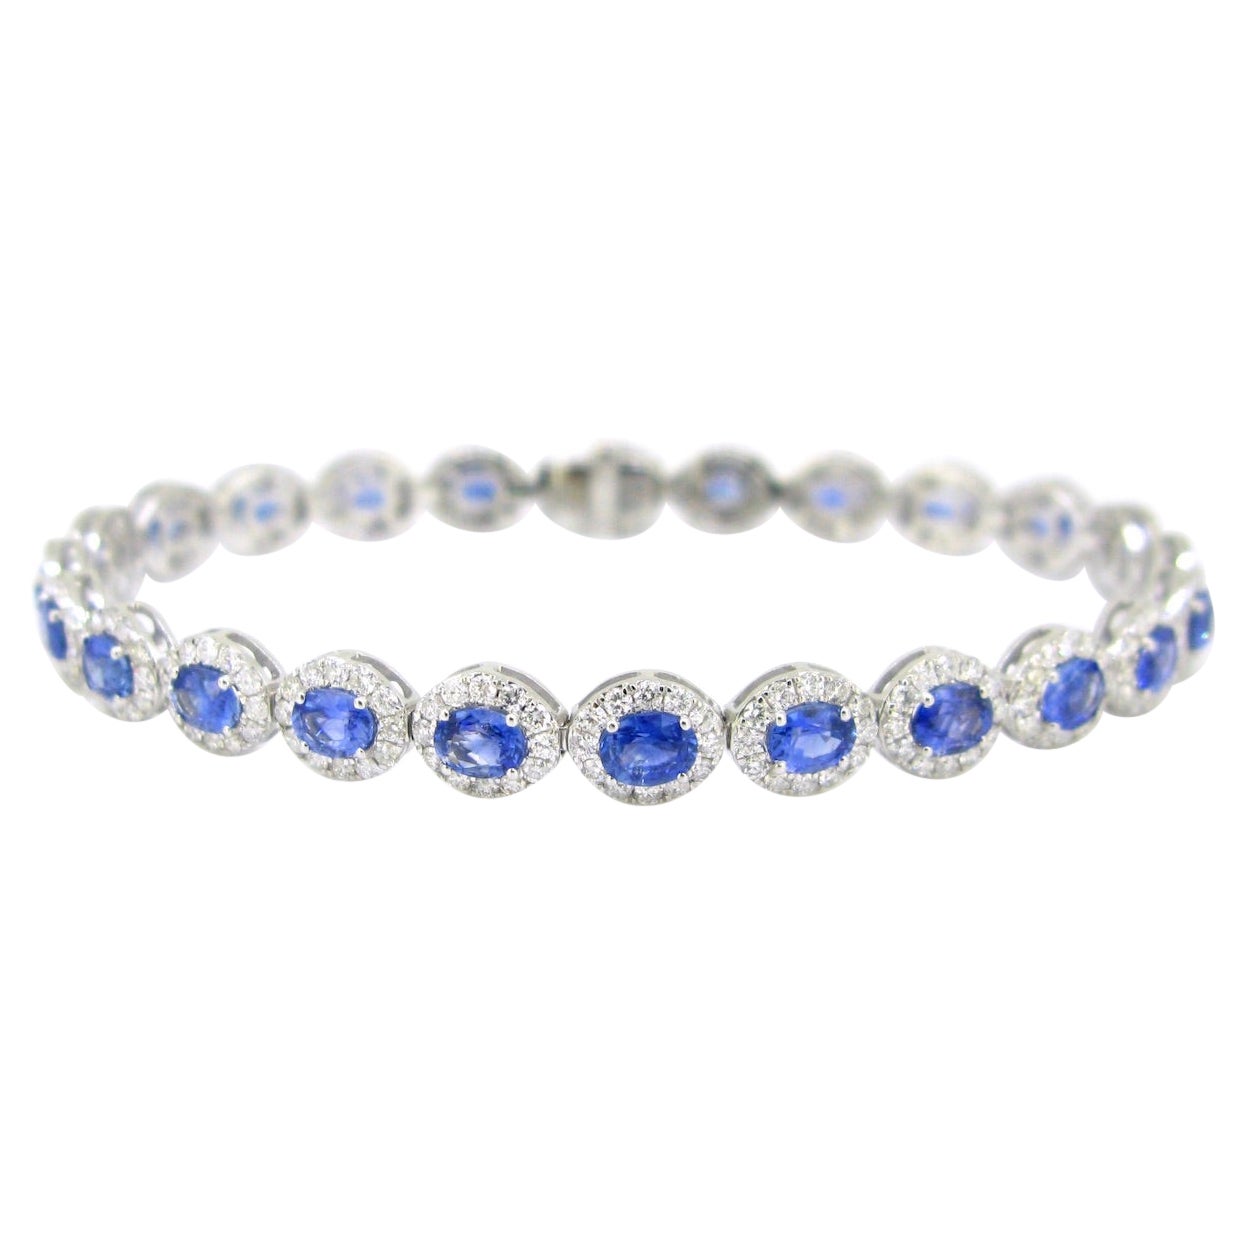 Sapphires and Diamonds Riviere Bracelet, 18kt White Gold